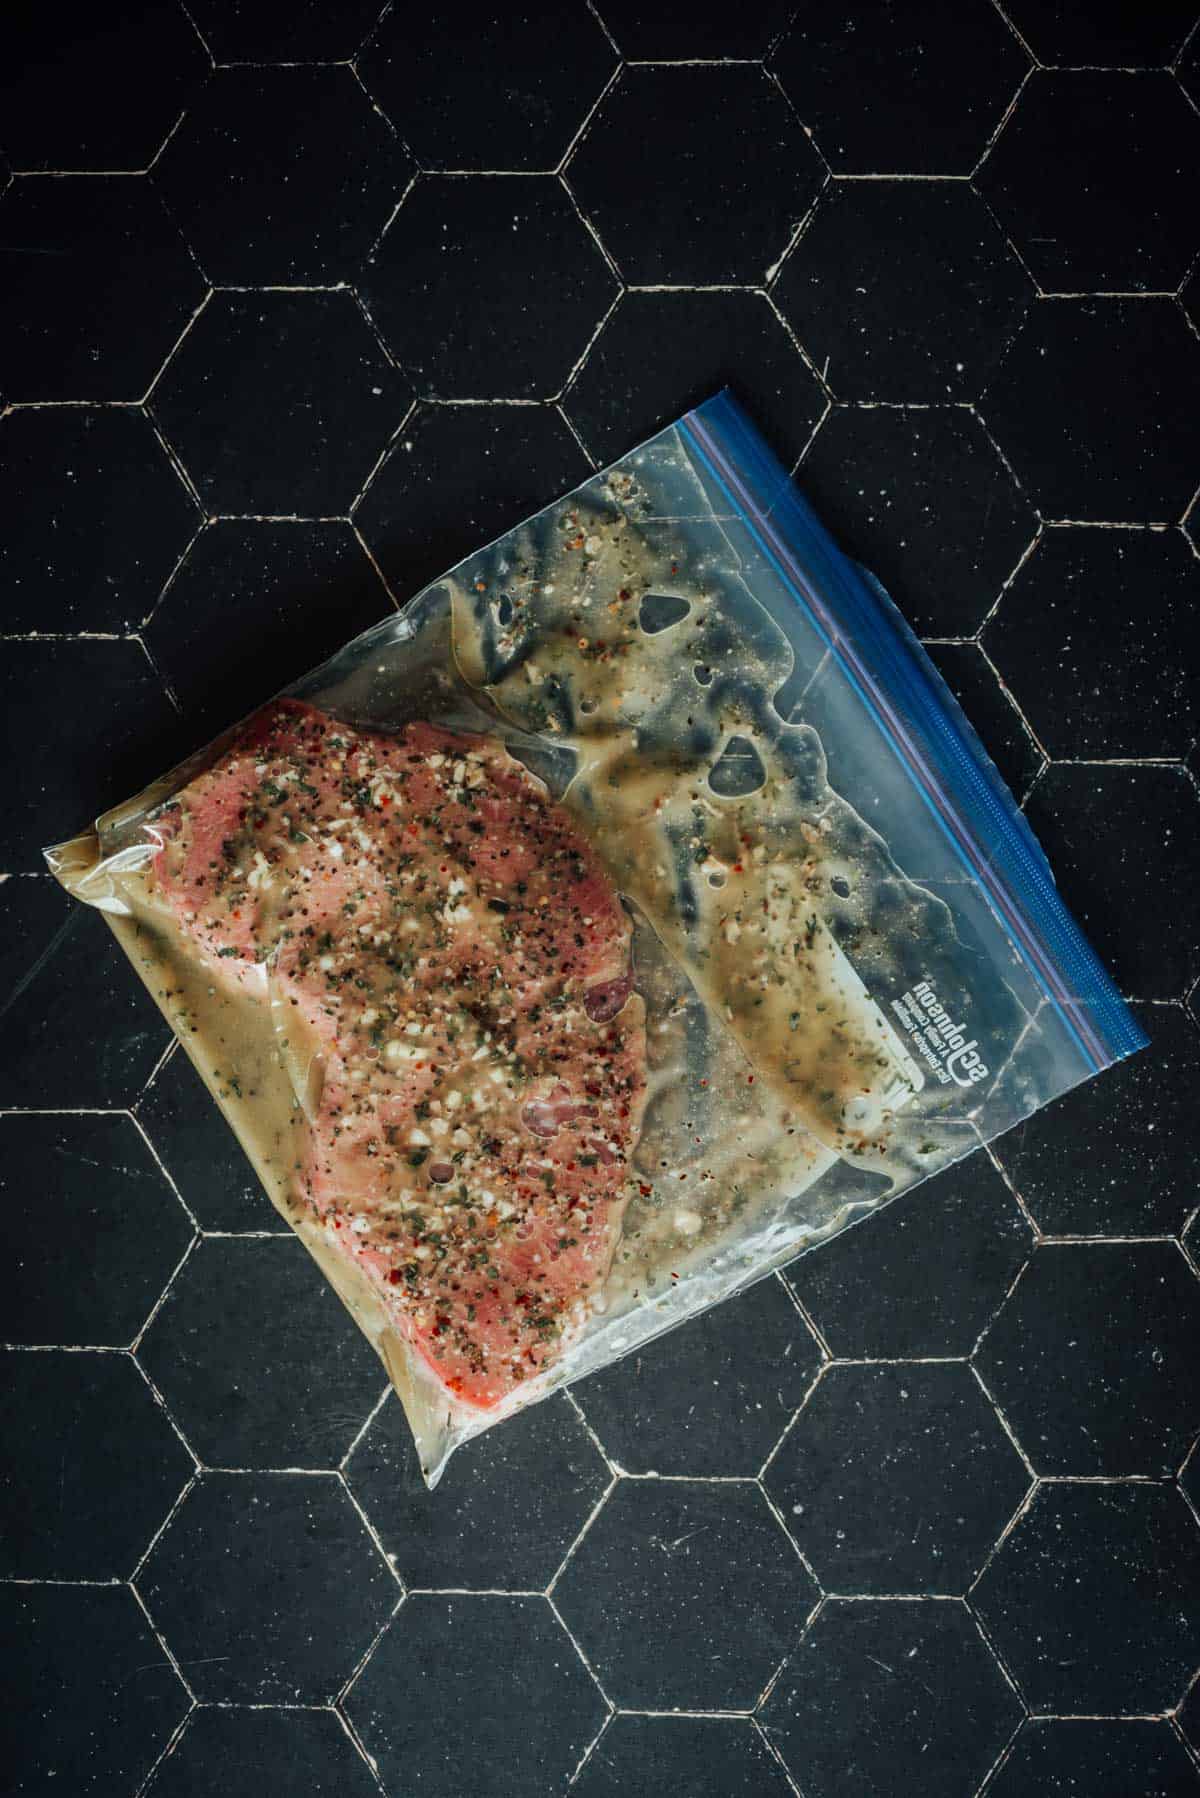 A londlon broil marinating in a resealable plastic bag lies on a dark hexagonal tile surface.